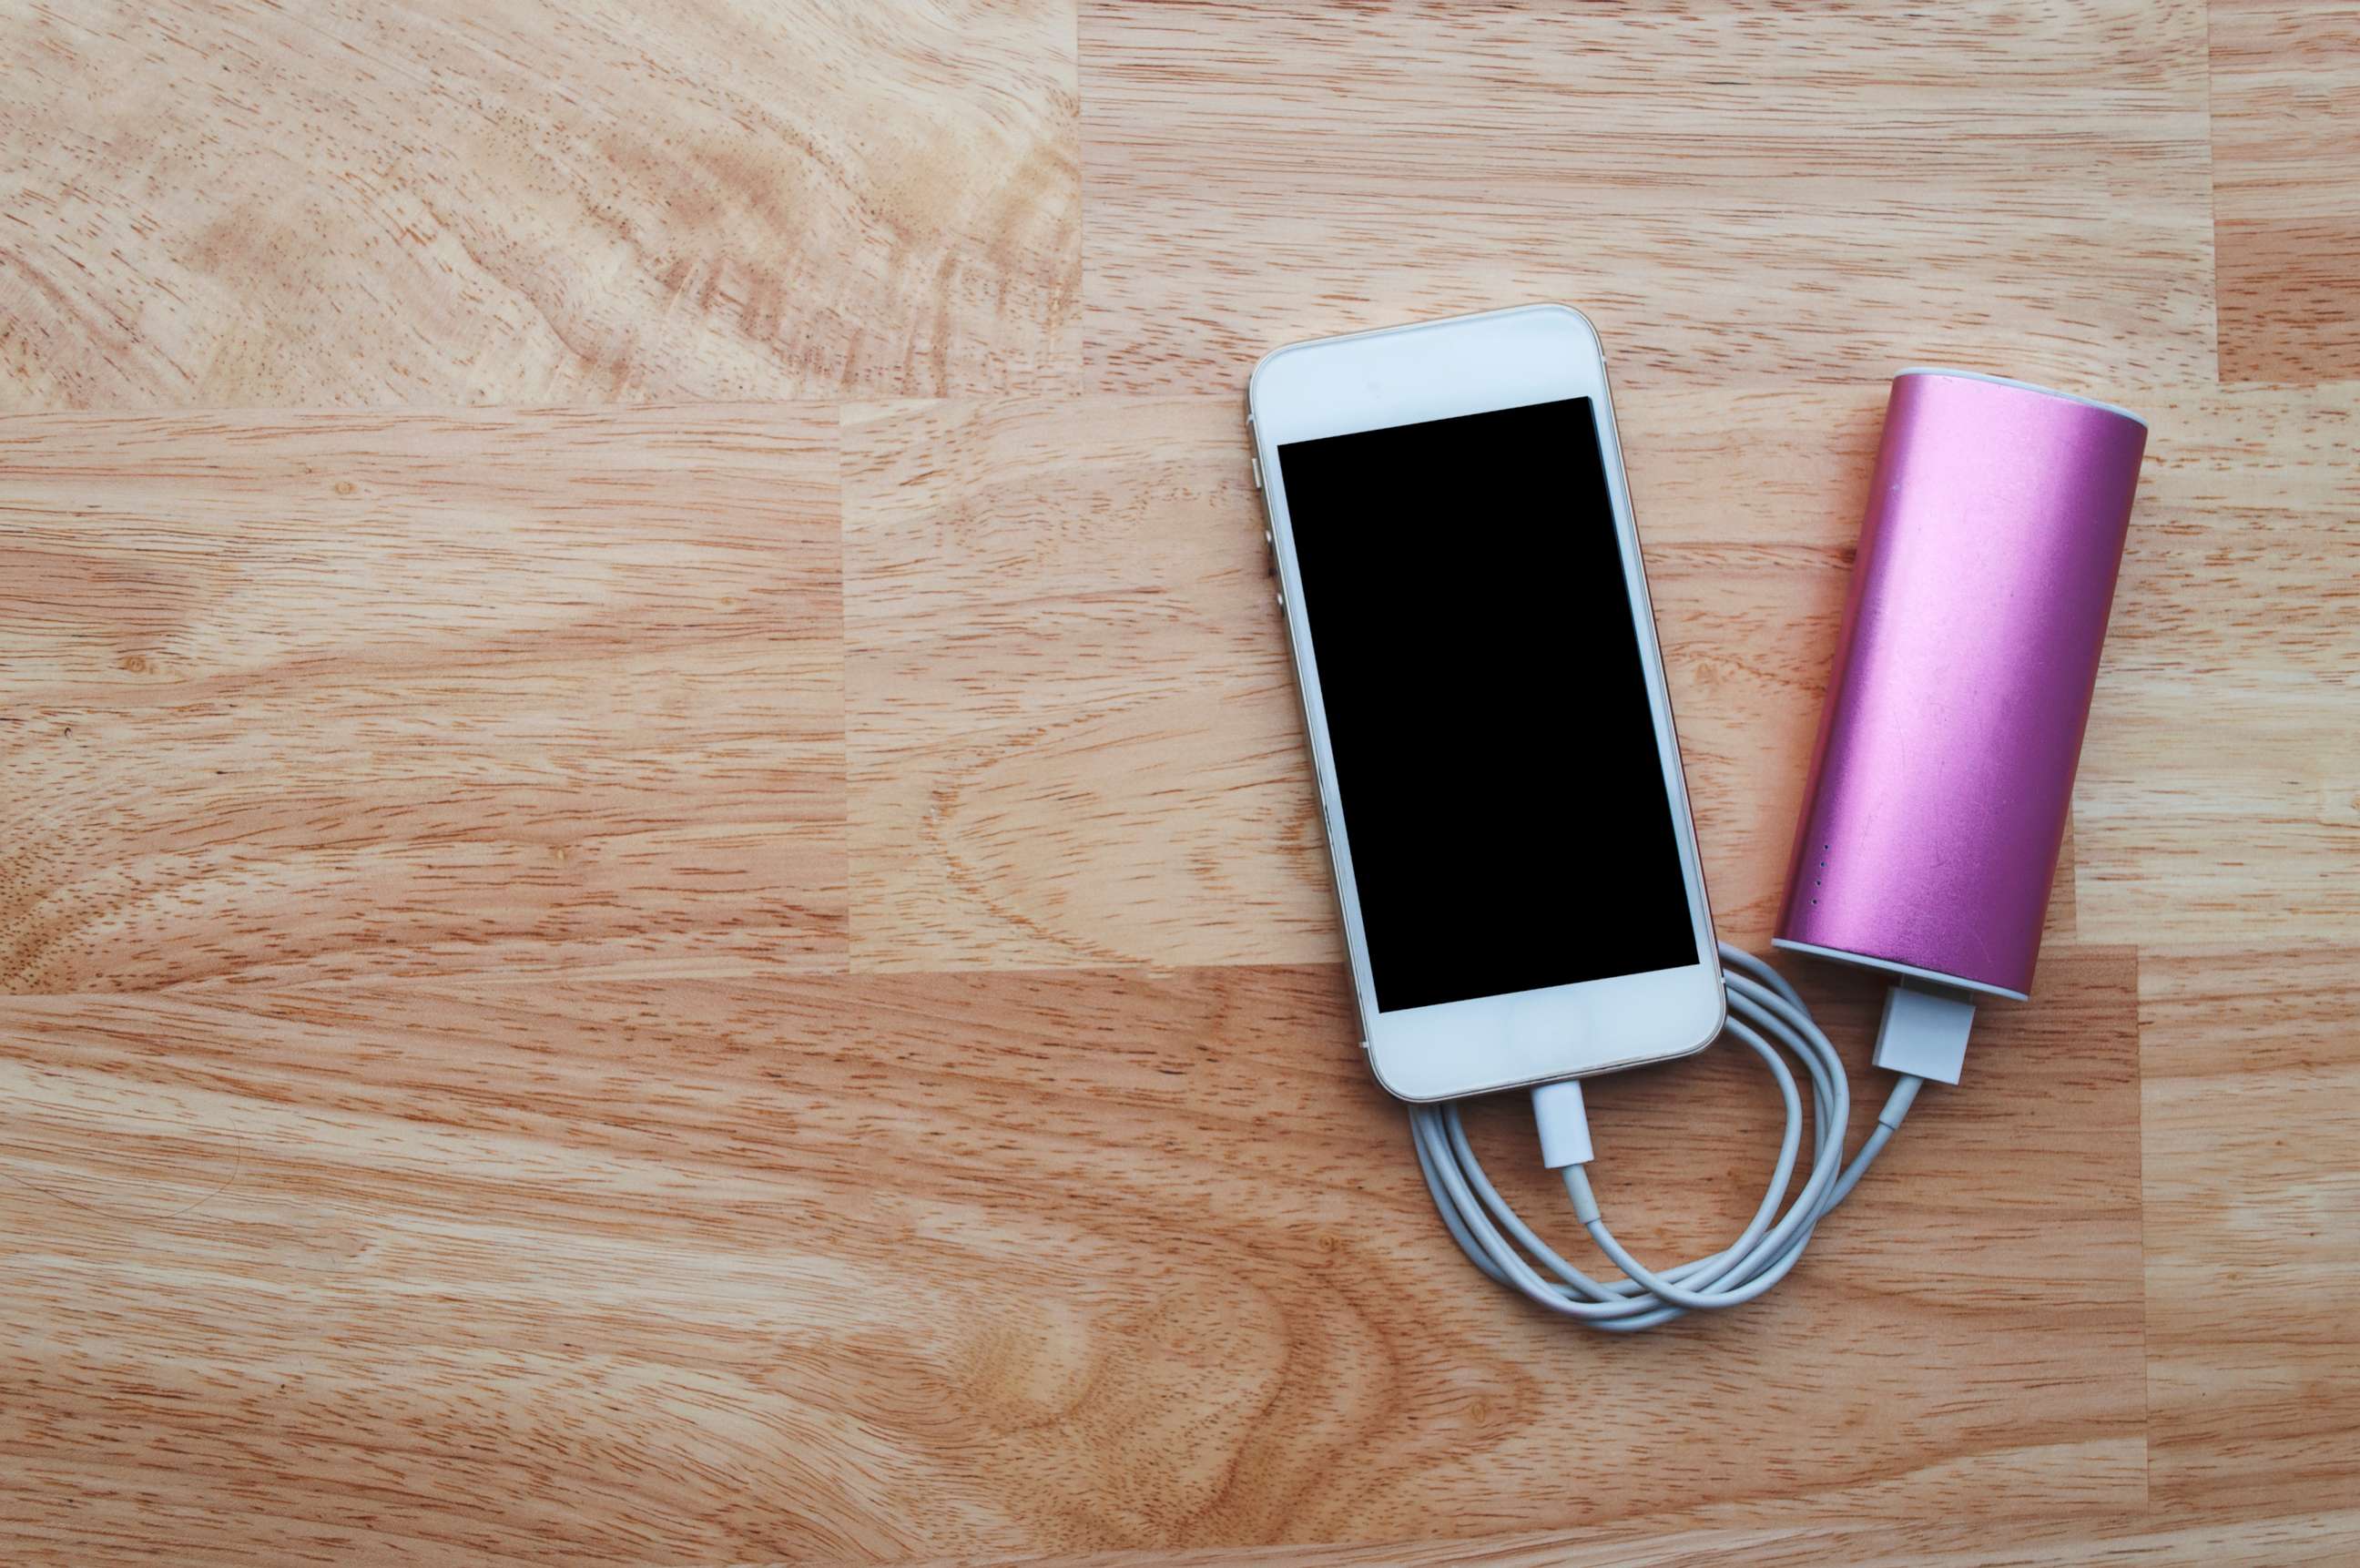 PHOTO: A smart phone is attached to a portable battery charger in this undated stock image.